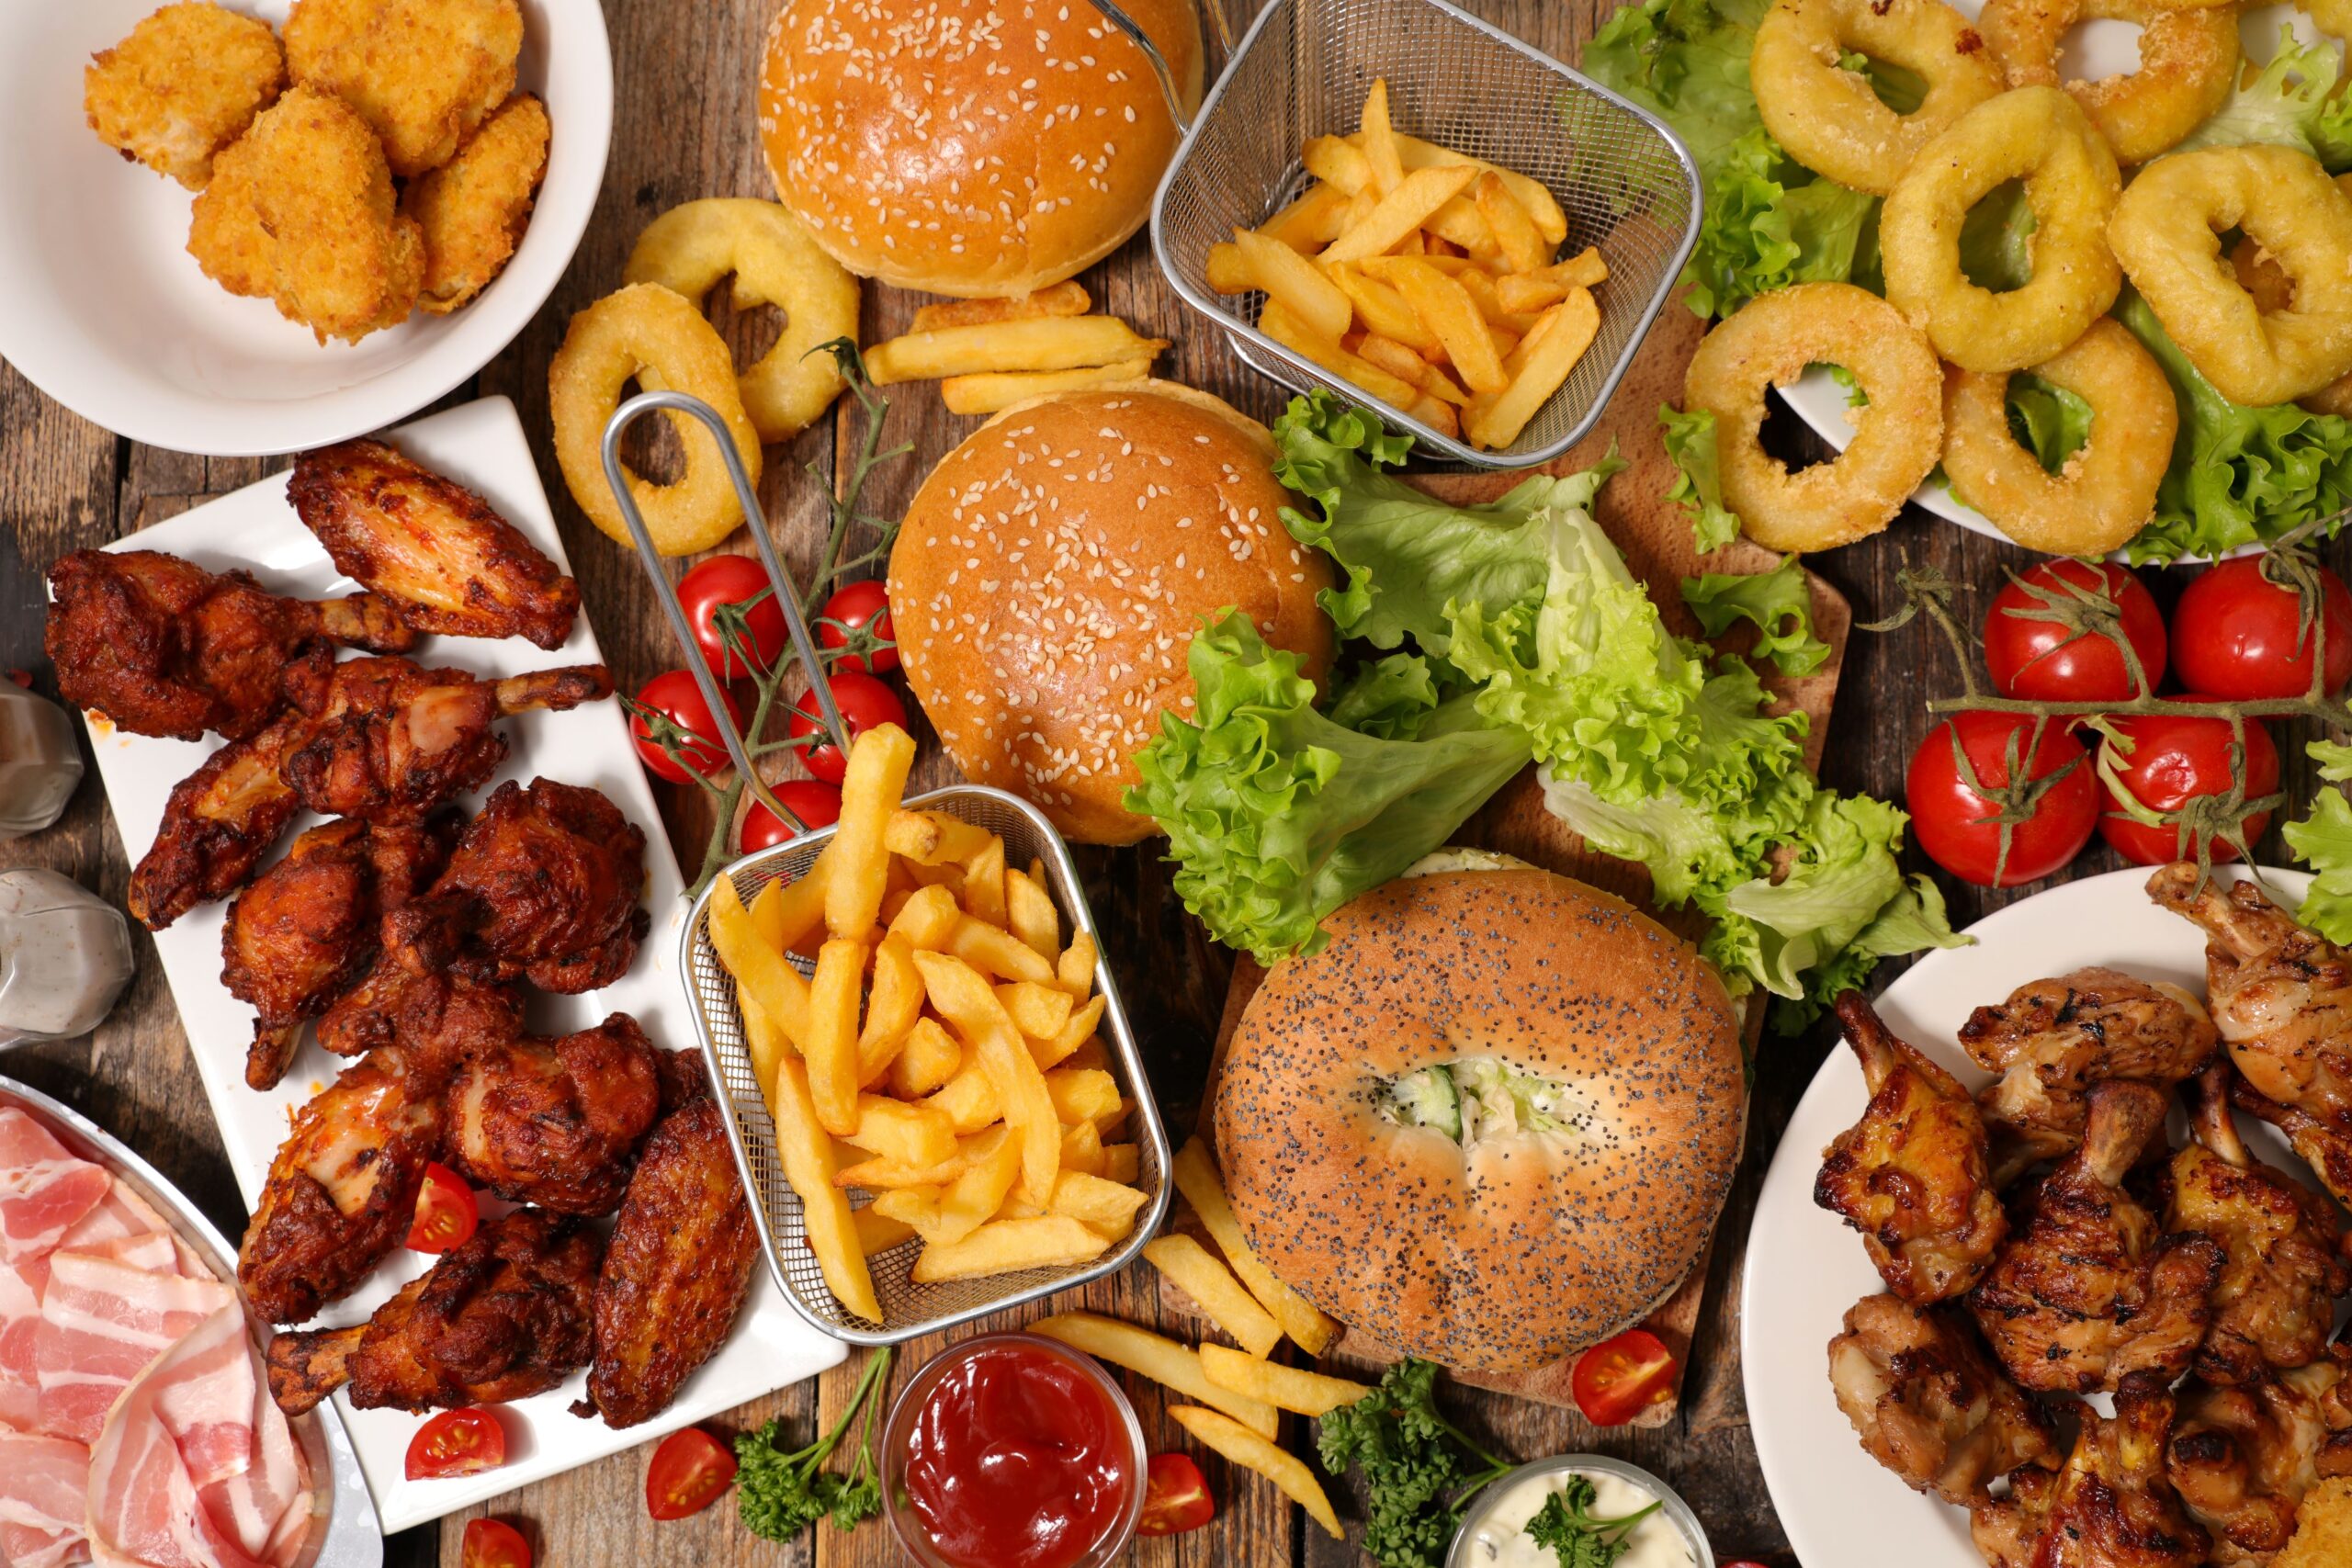 Obesity may not be the only factor to link ultra-processed foods to a higher risk of mouth, throat, and esophagus cancers